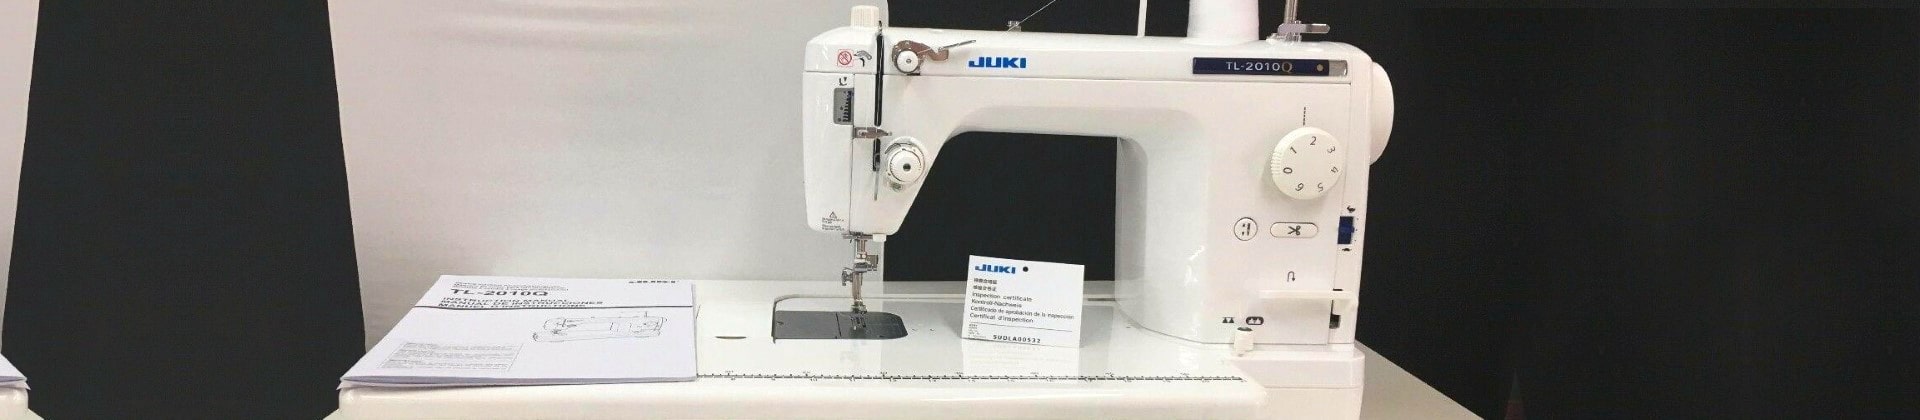 5 Best Computerized Sewing Machines Reviewed In Detail Oct 2020,Vinegar In Laundry To Remove Odor